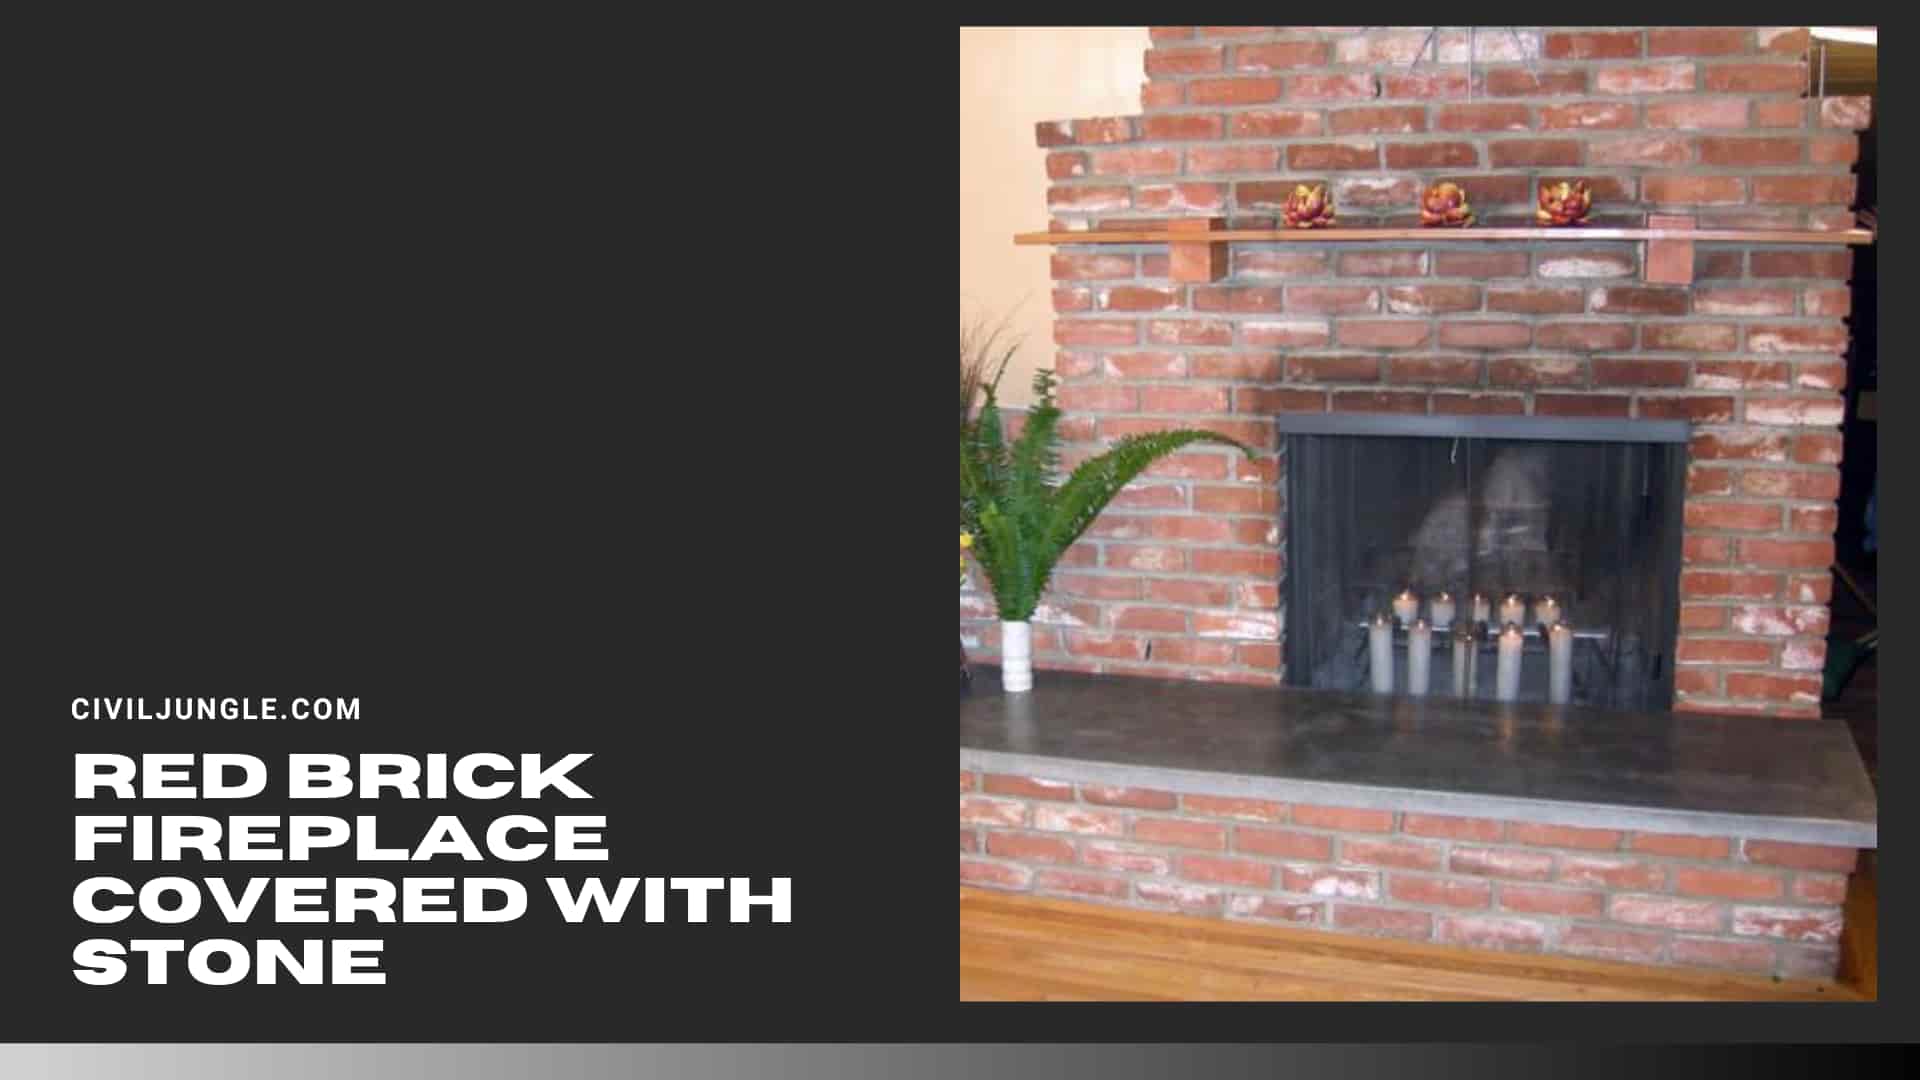 Red Brick Fireplace Covered with Stone